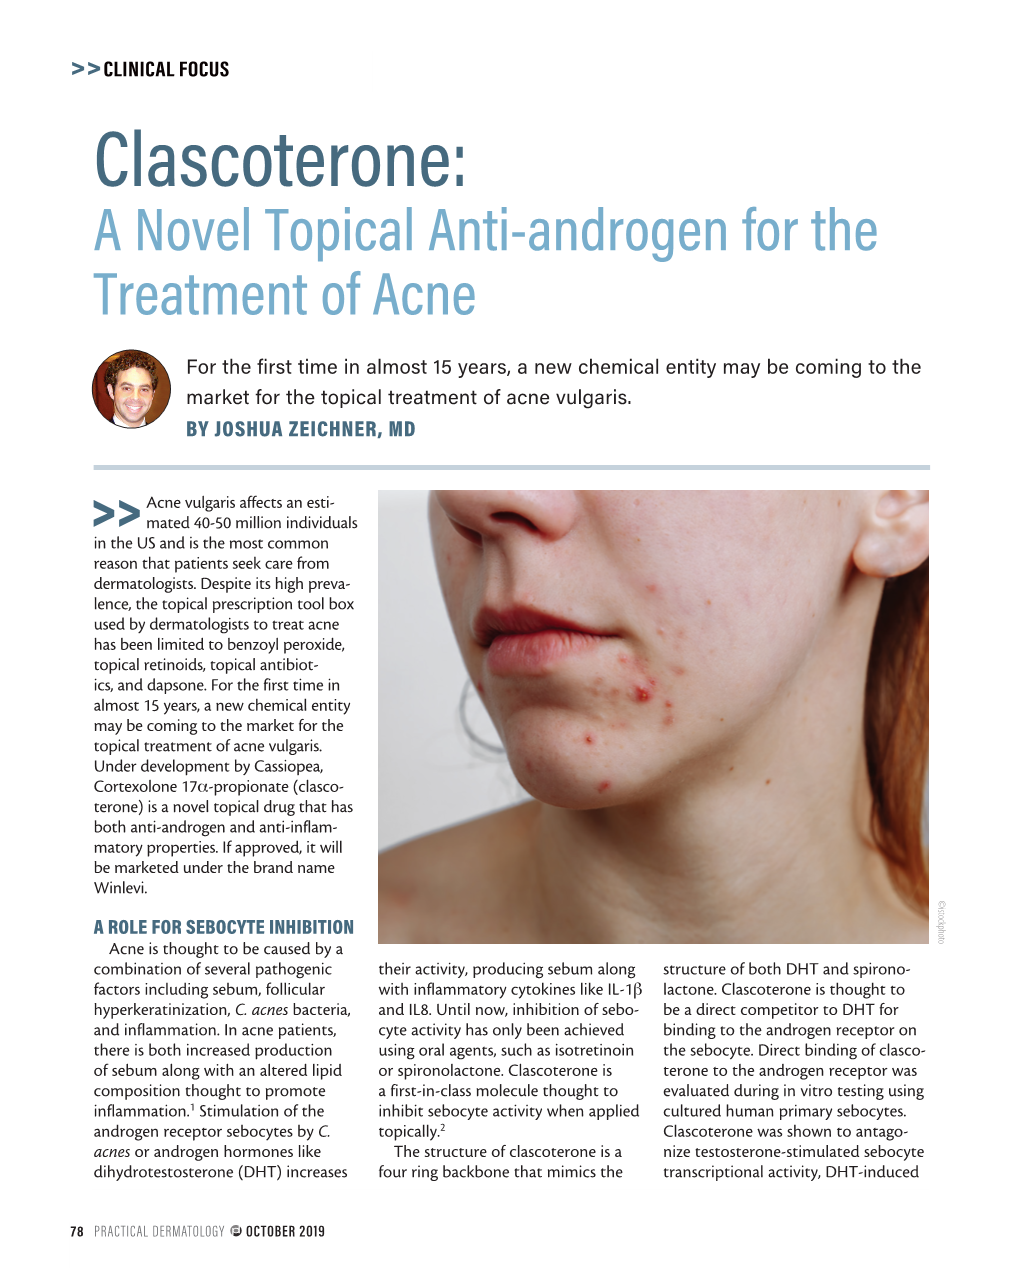 Clascoterone: a Novel Topical Anti-Androgen for the Treatment of Acne